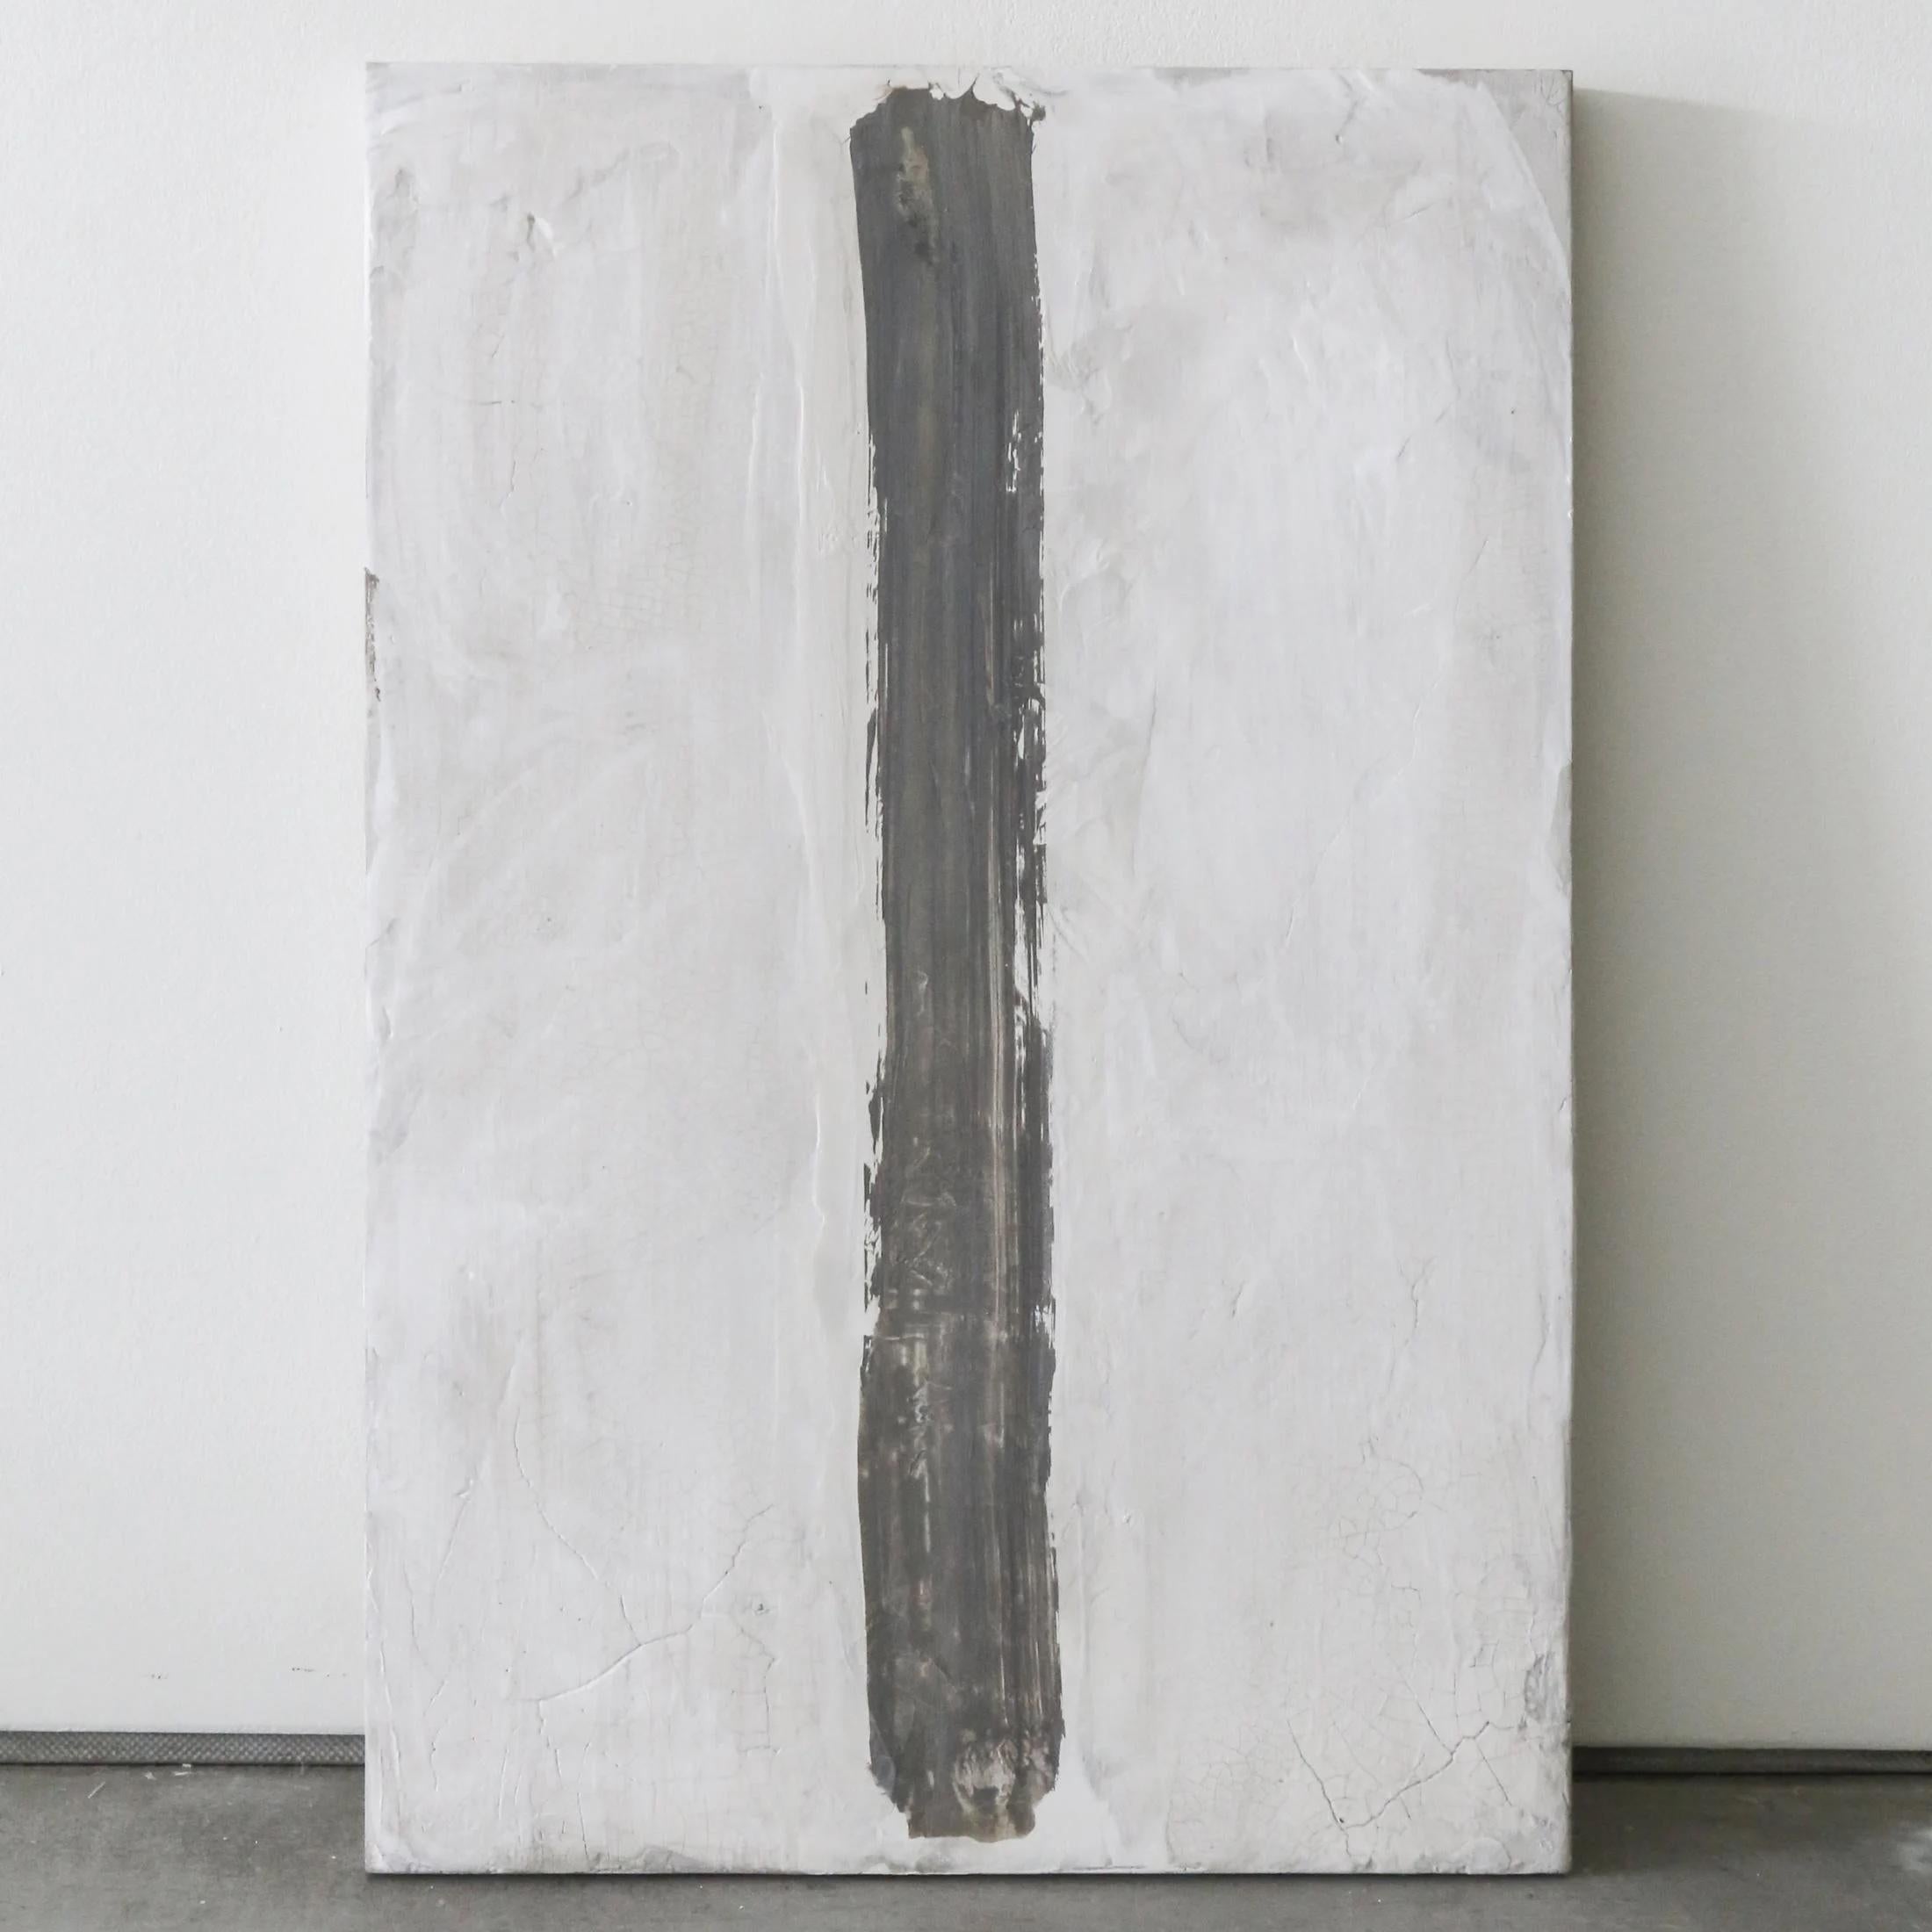 Kim Fonder, LINEA CARBONE, Mixed Media on Panel, 40.00 X 24.00 in, $2,200.00, White,
Grey, Abstract, mixed media, contemporary

Kim Fonder loves texture and touch. Her paintings and furniture reflect her infatuation with these two characteristics.